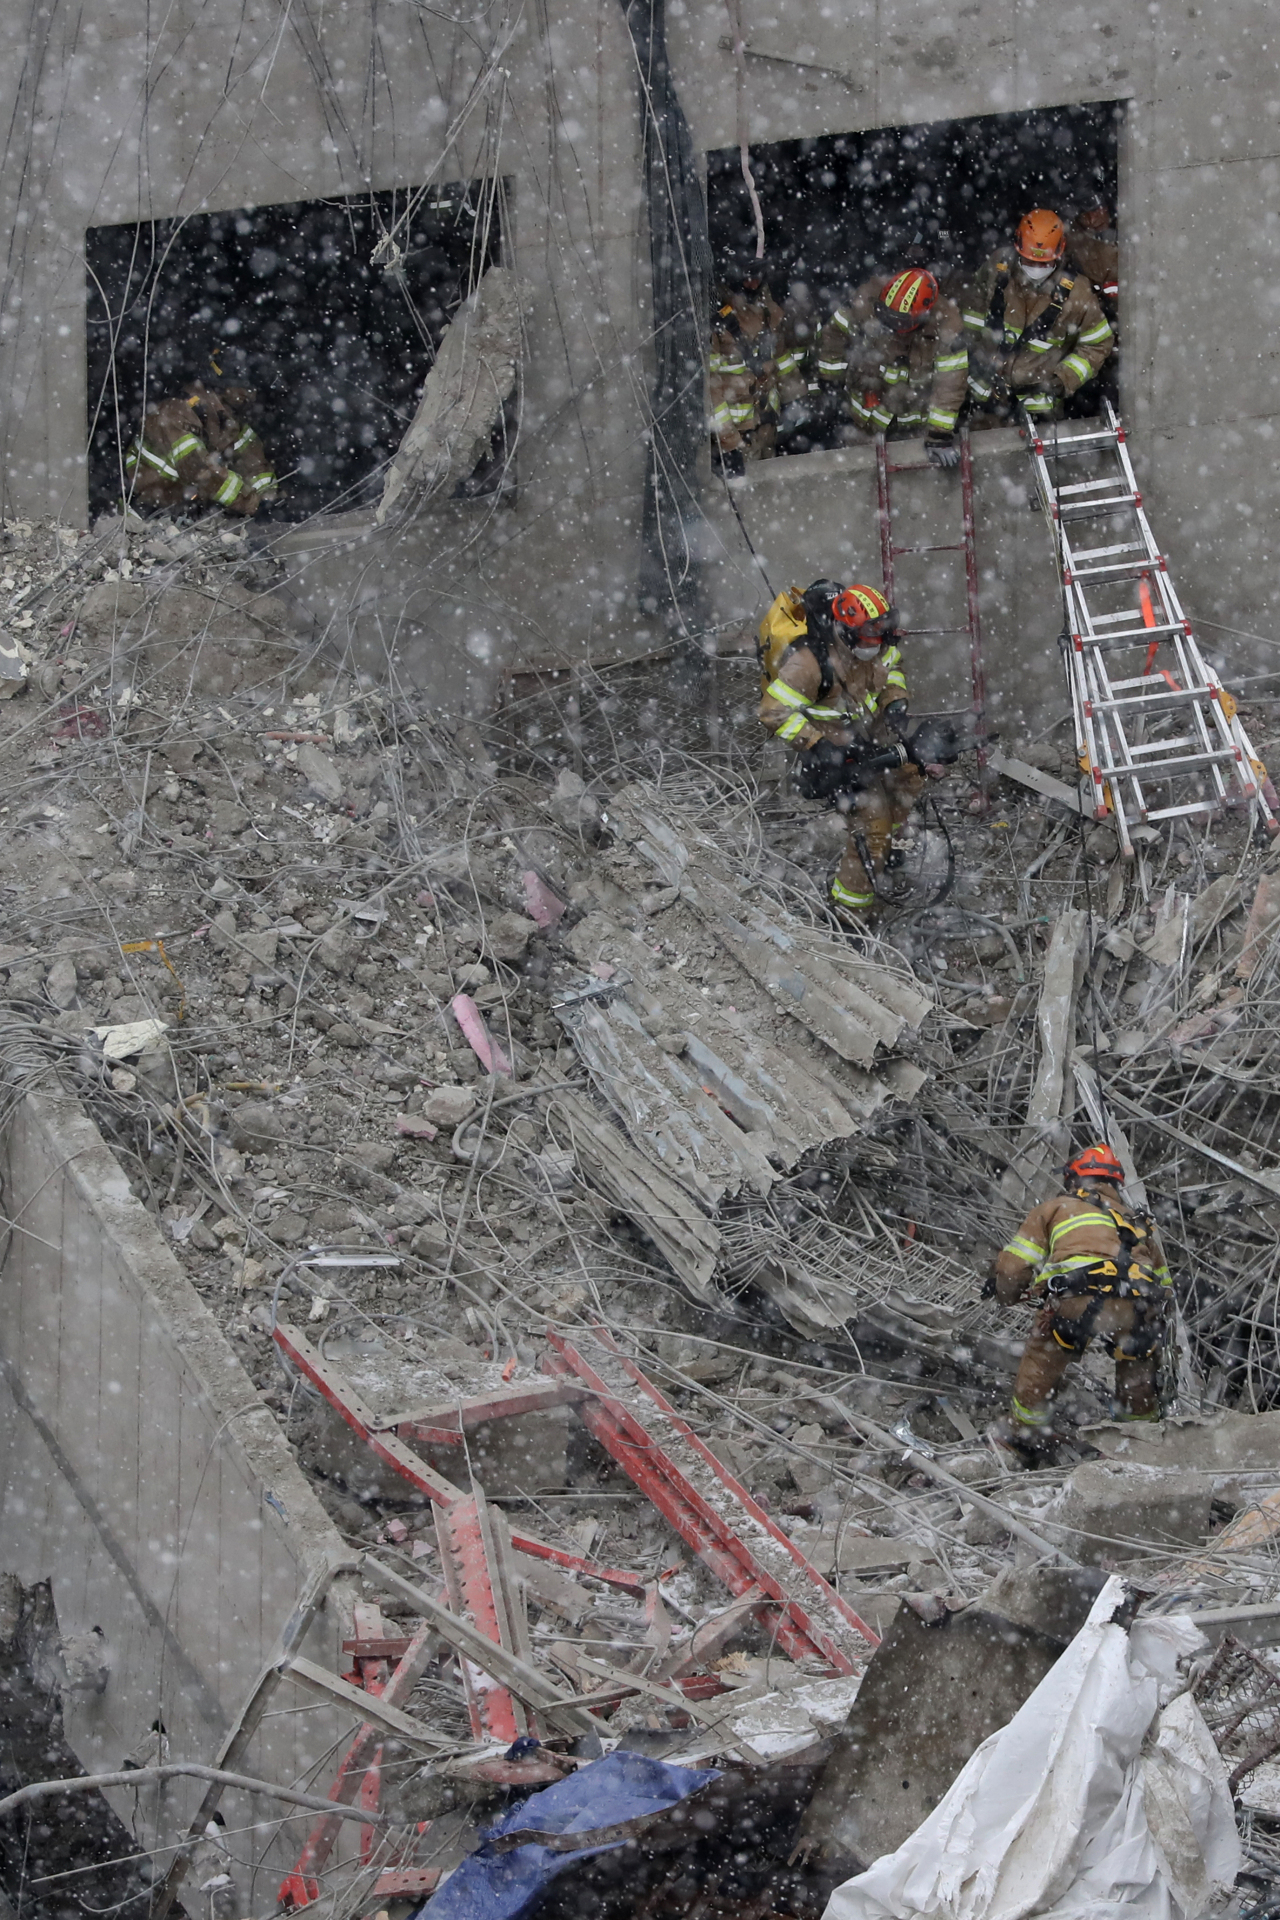 Rescuers comb through debris last Thursday, looking for workers who went missing in a deadly apartment construction accident in the southern city of Gwangju. (Yonhap)